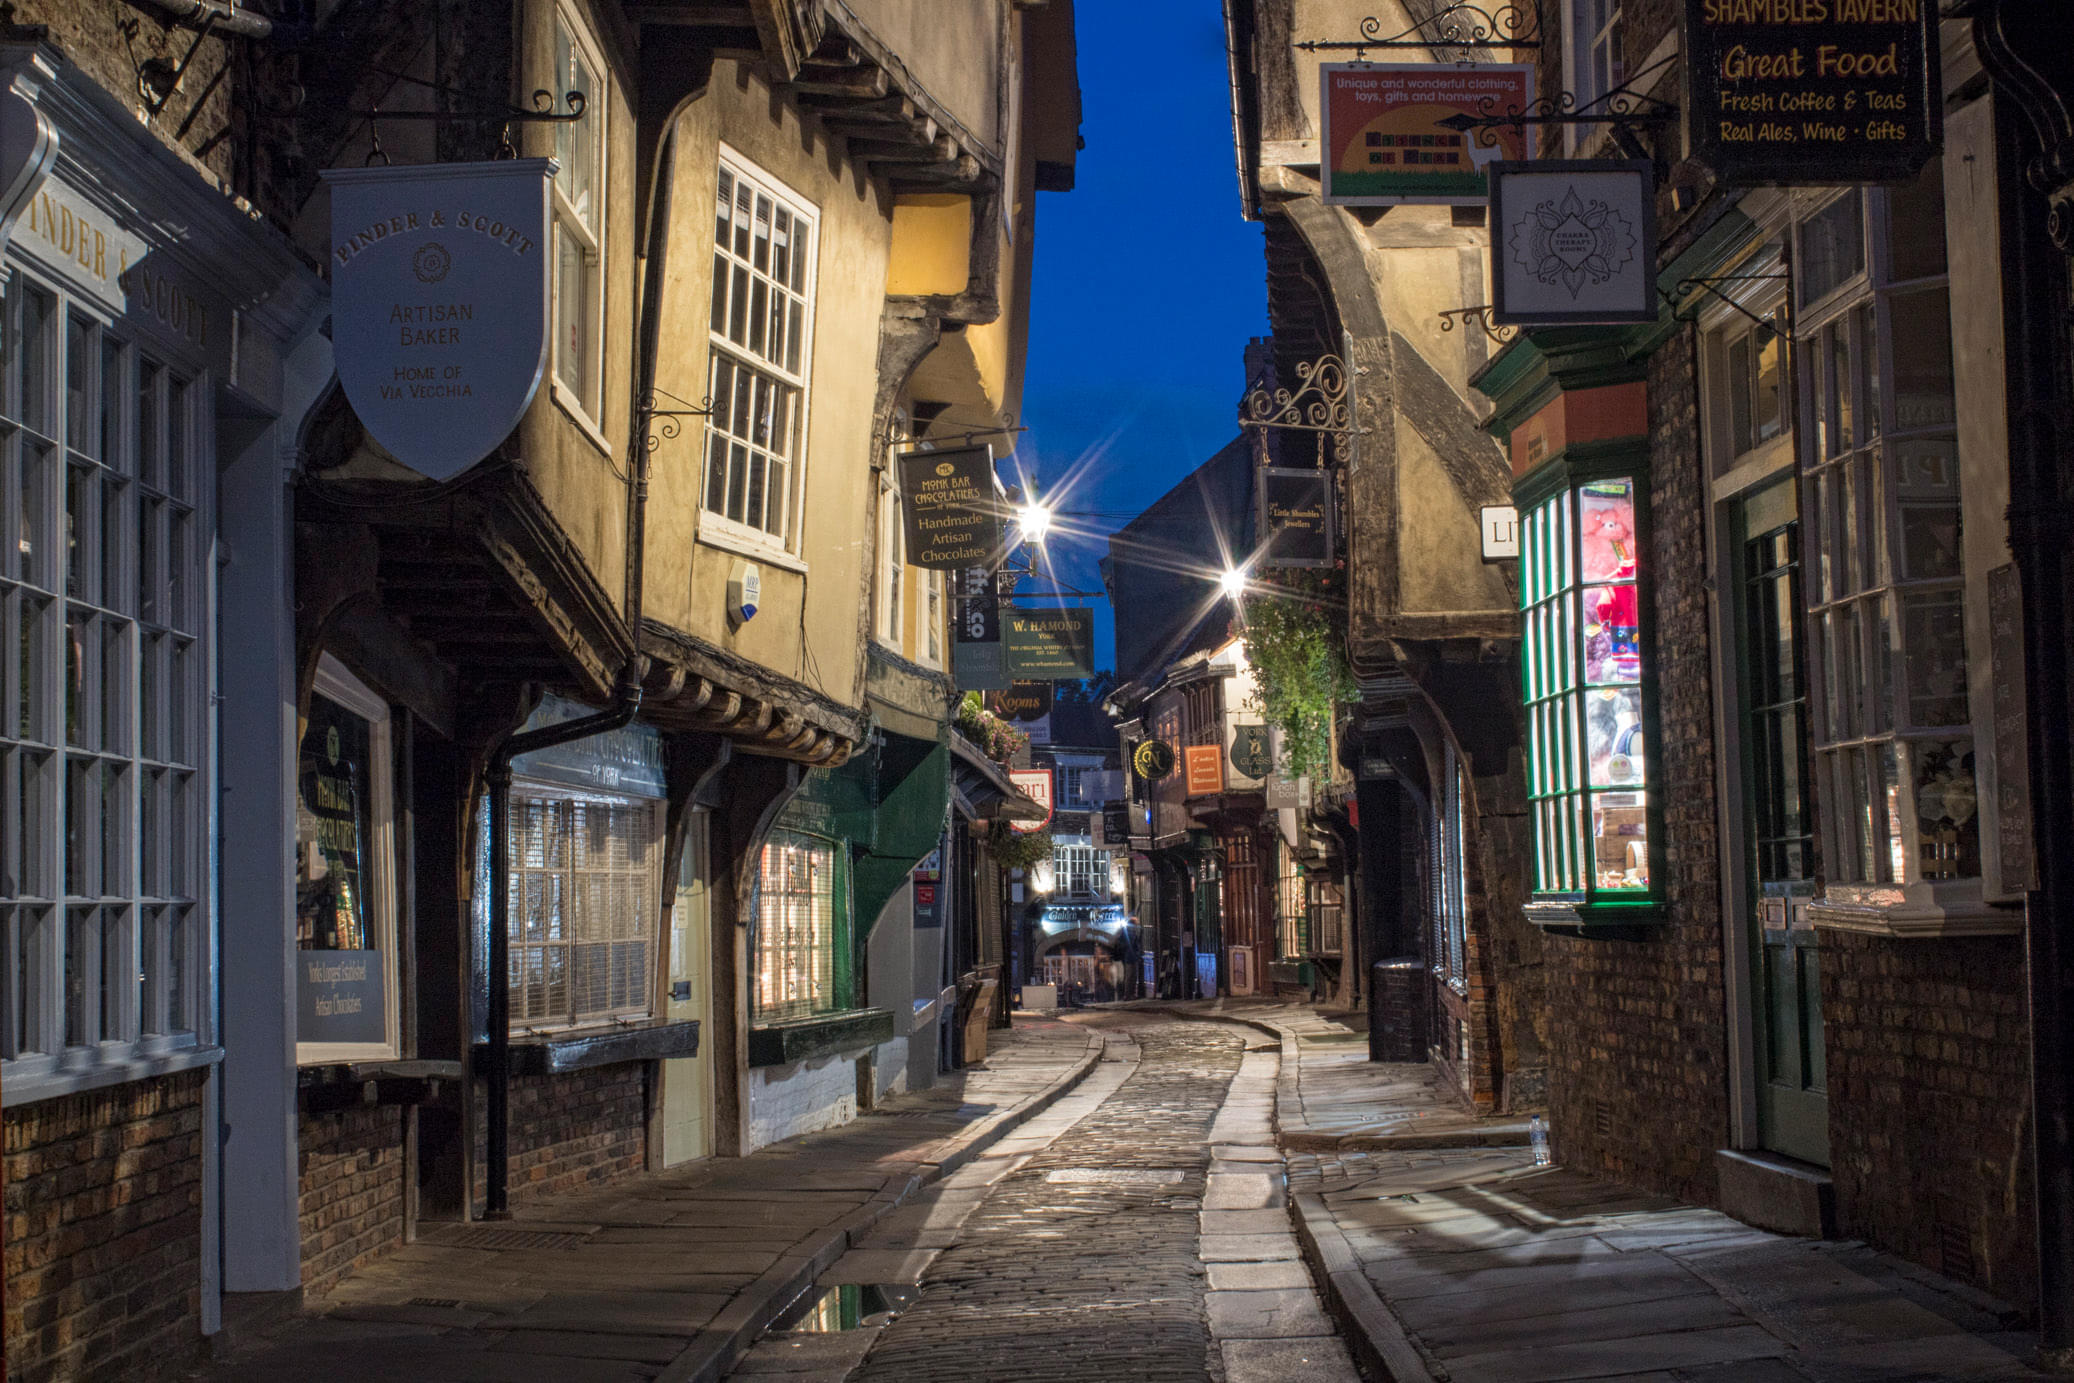 The Shambles Overview